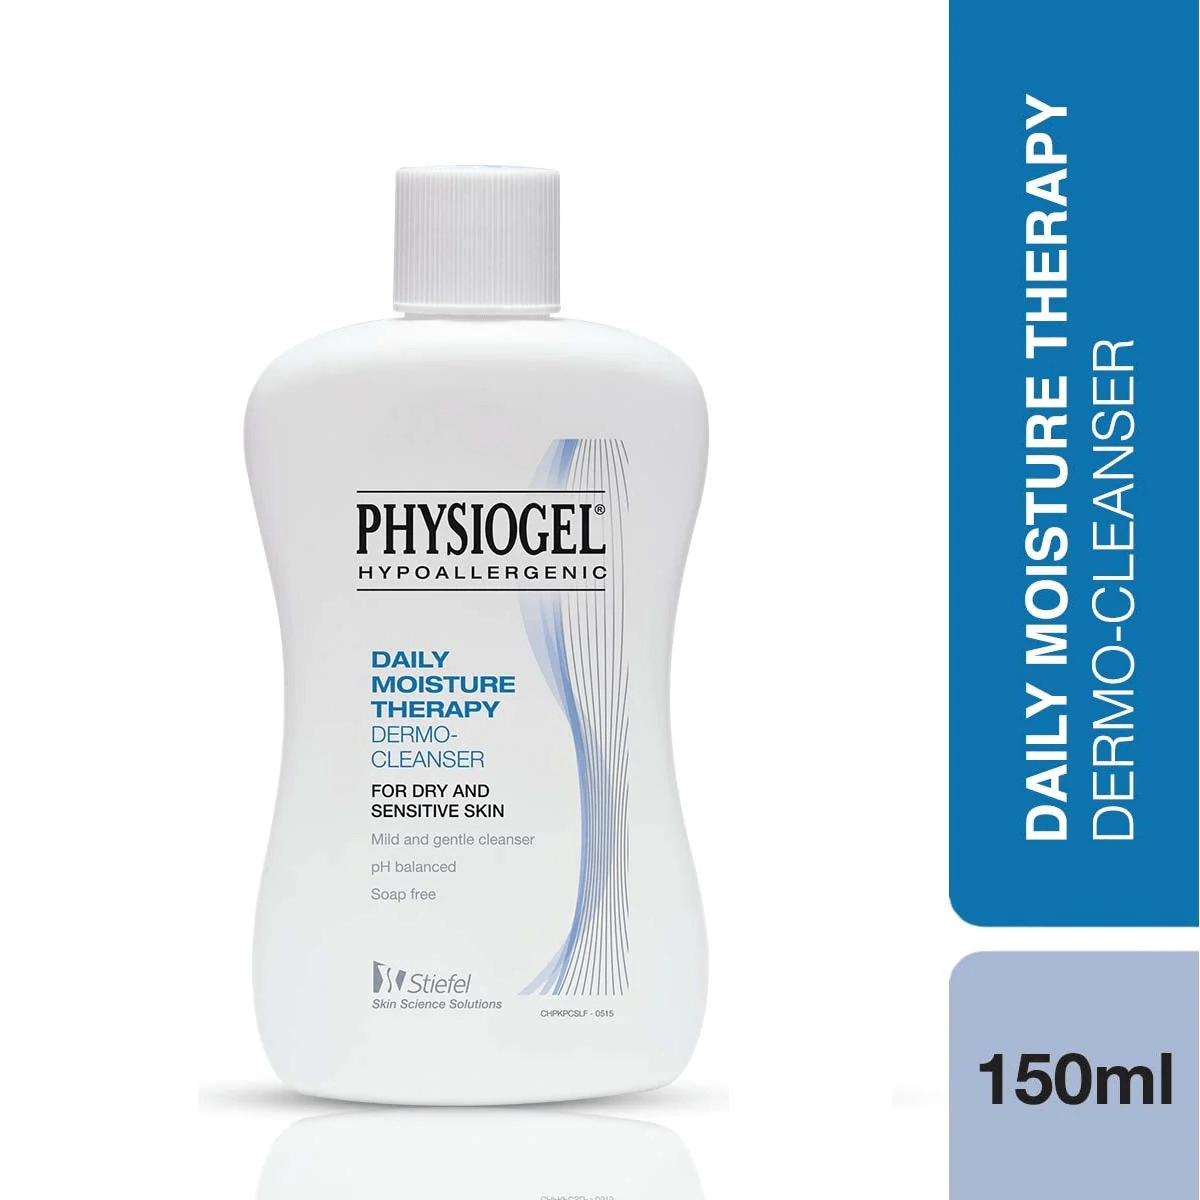 Physiogel Daily Moisture Therapy Dermo-Cleanser, Dry and Sensitive Skin